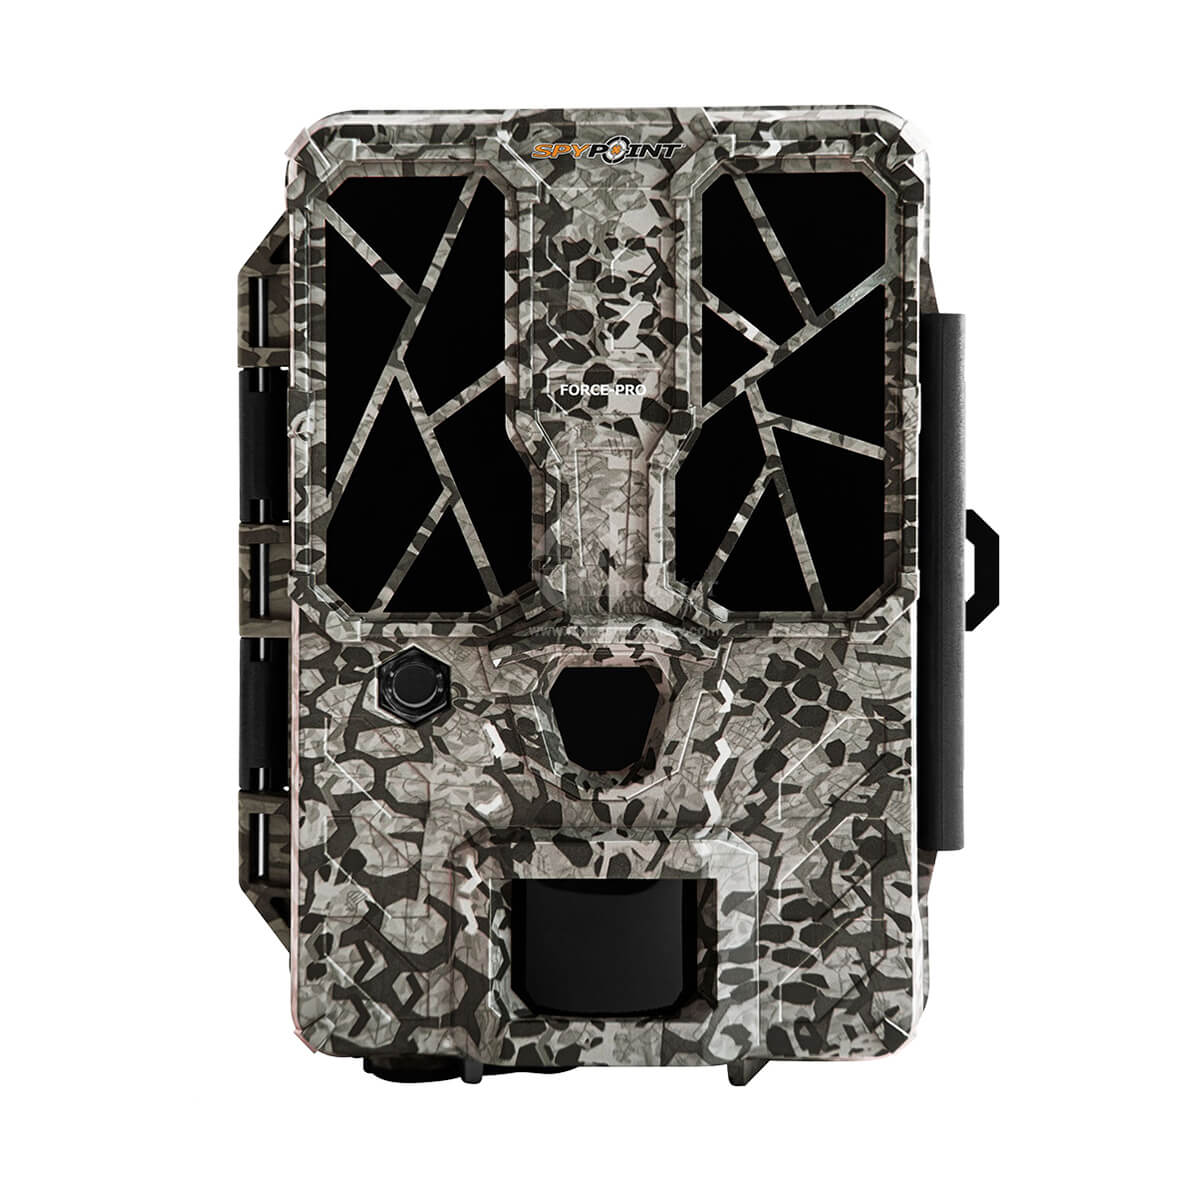 Spypoint Force Pro Trail Camera